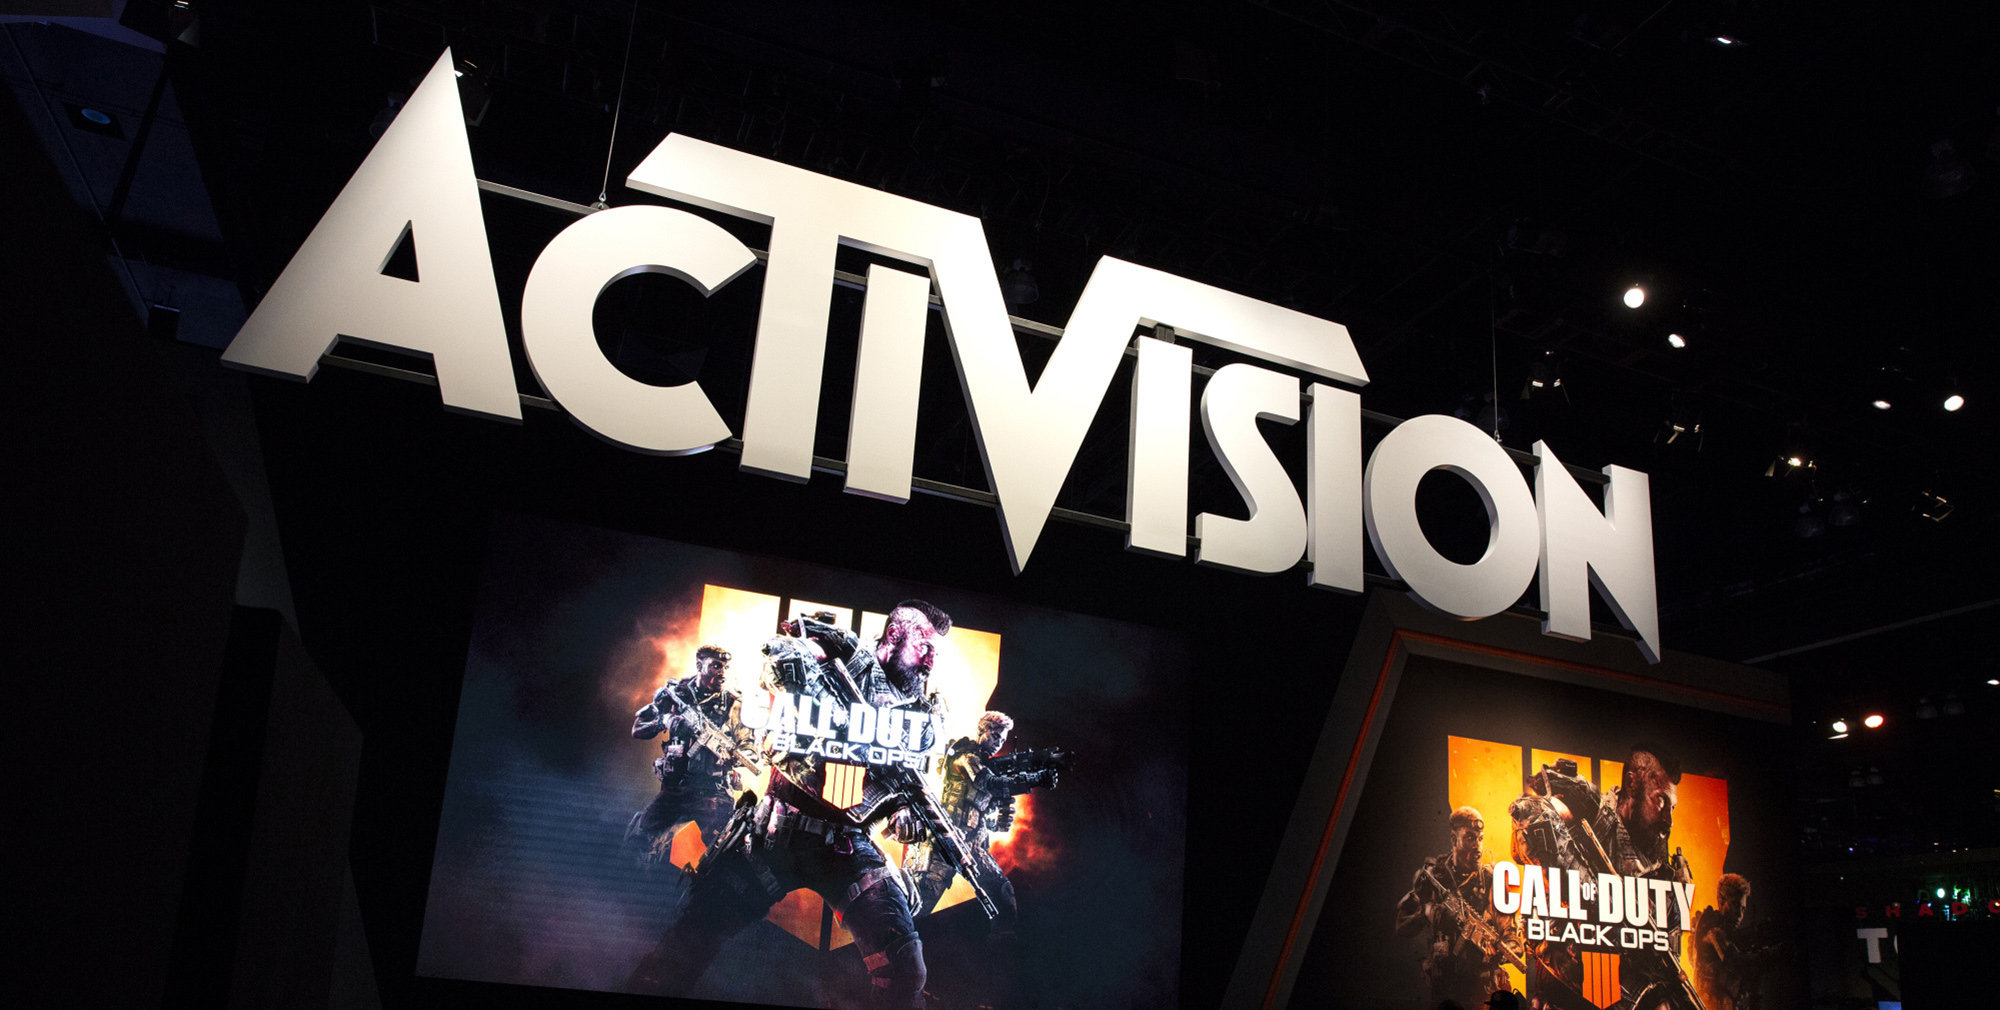 Microsoft cleared to buy Activision for $69B